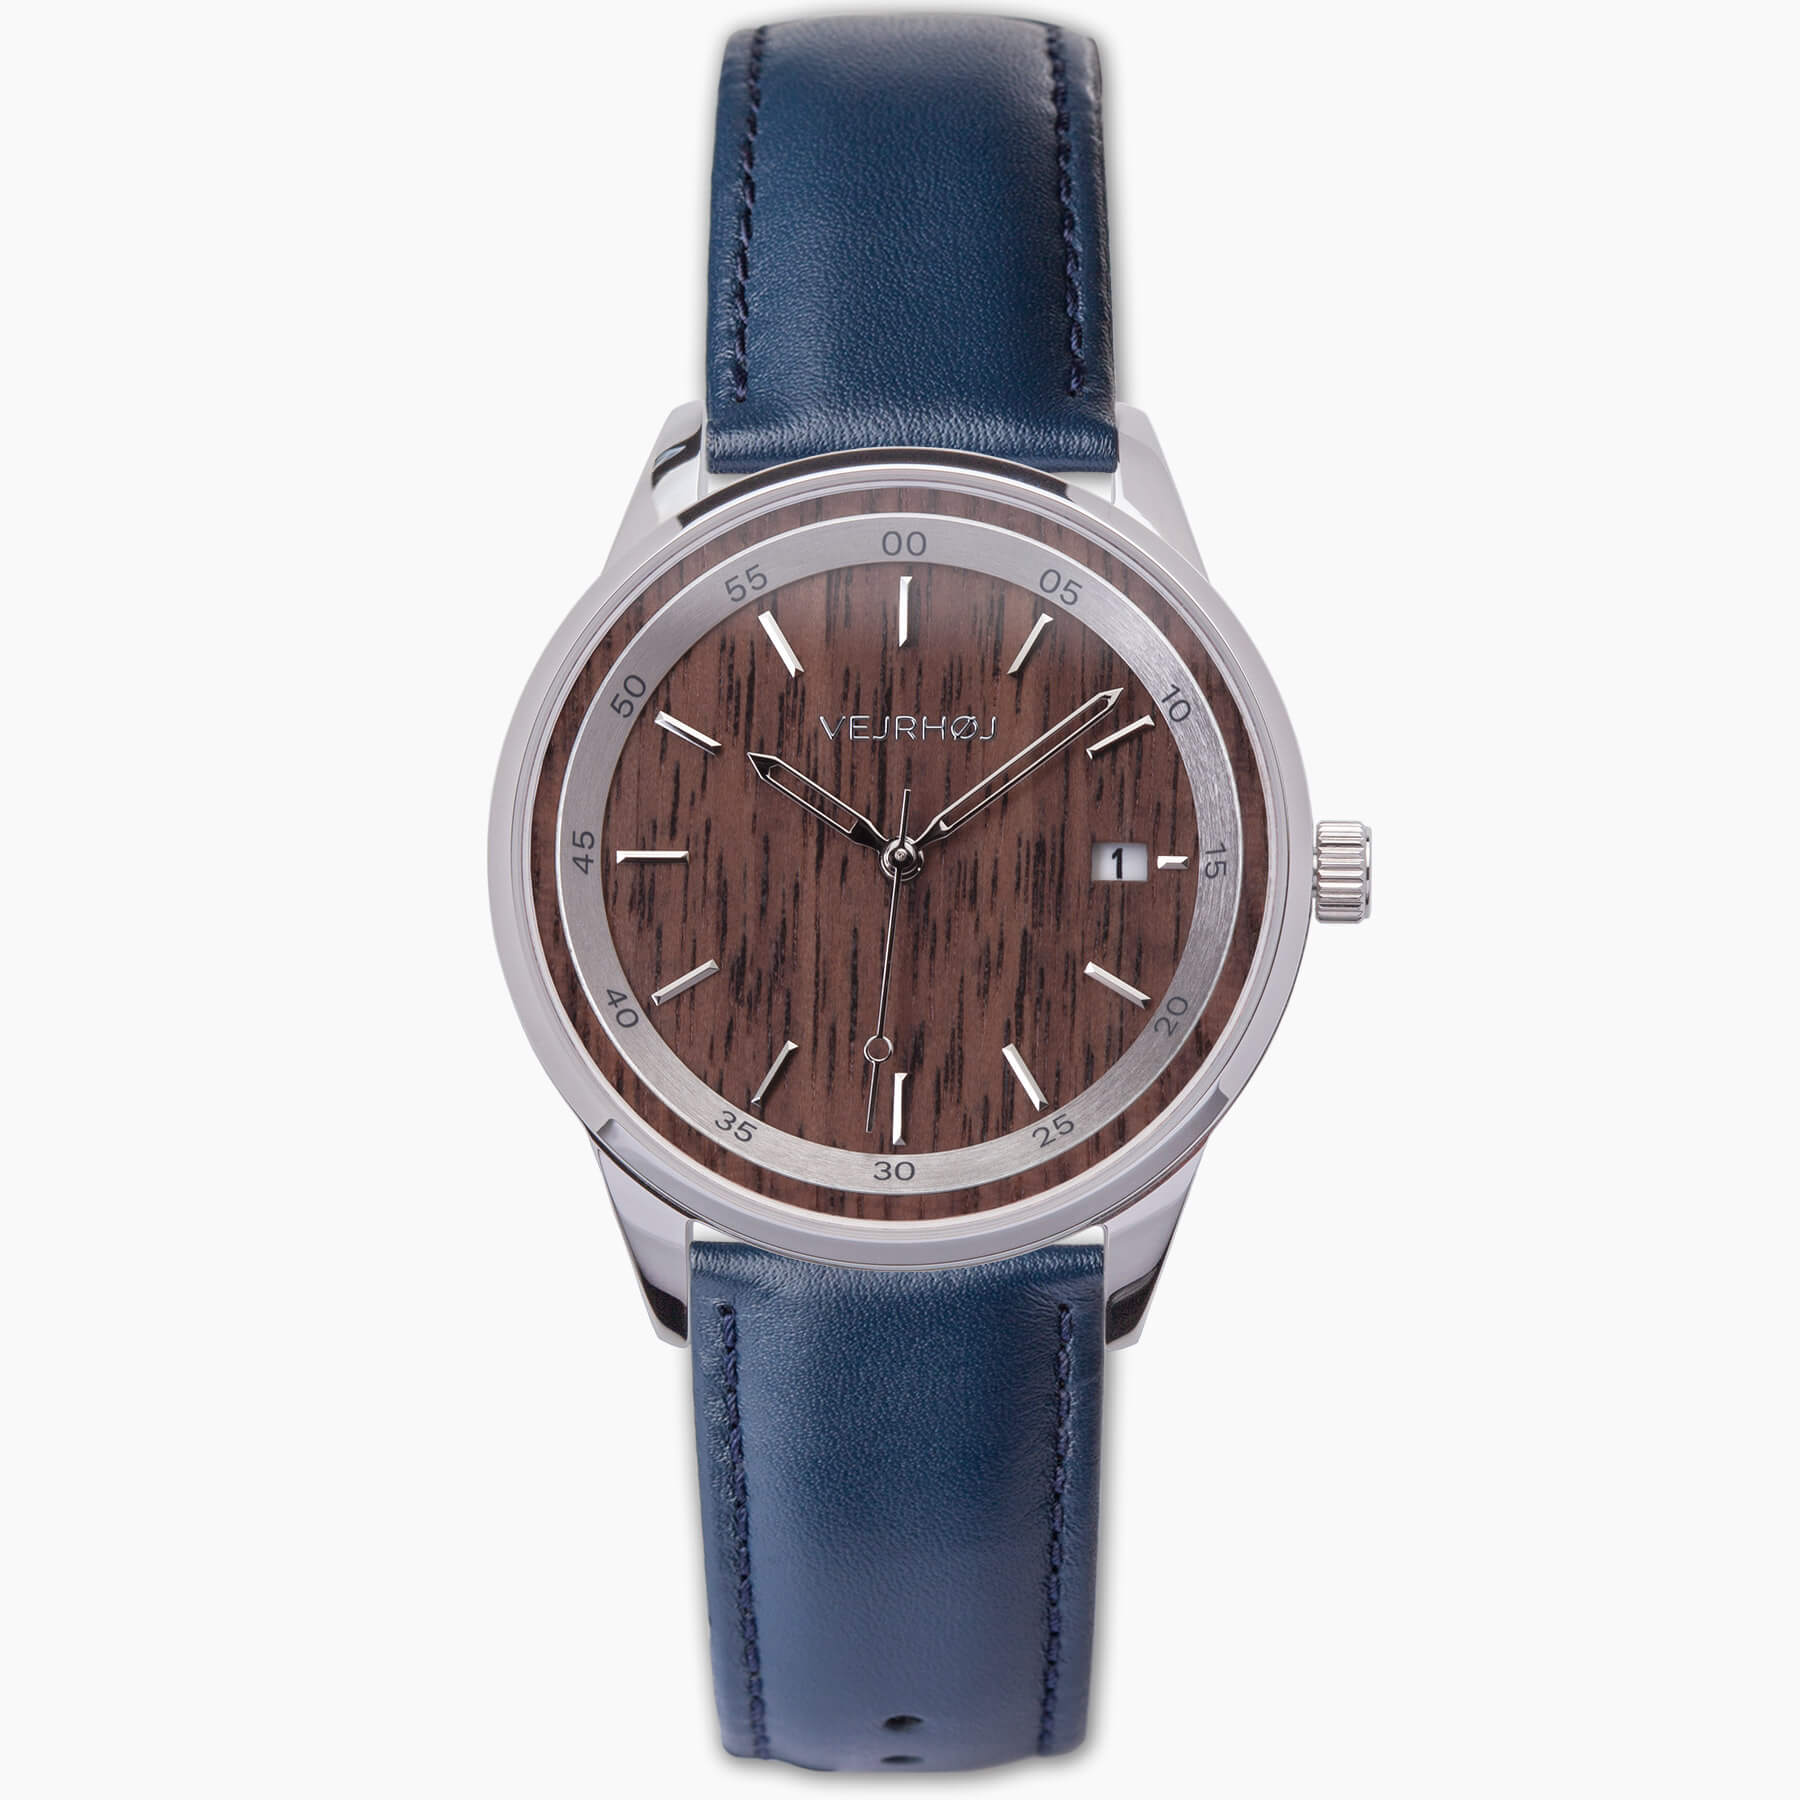 Brown automatic wrist watch with silver hands and blue straps